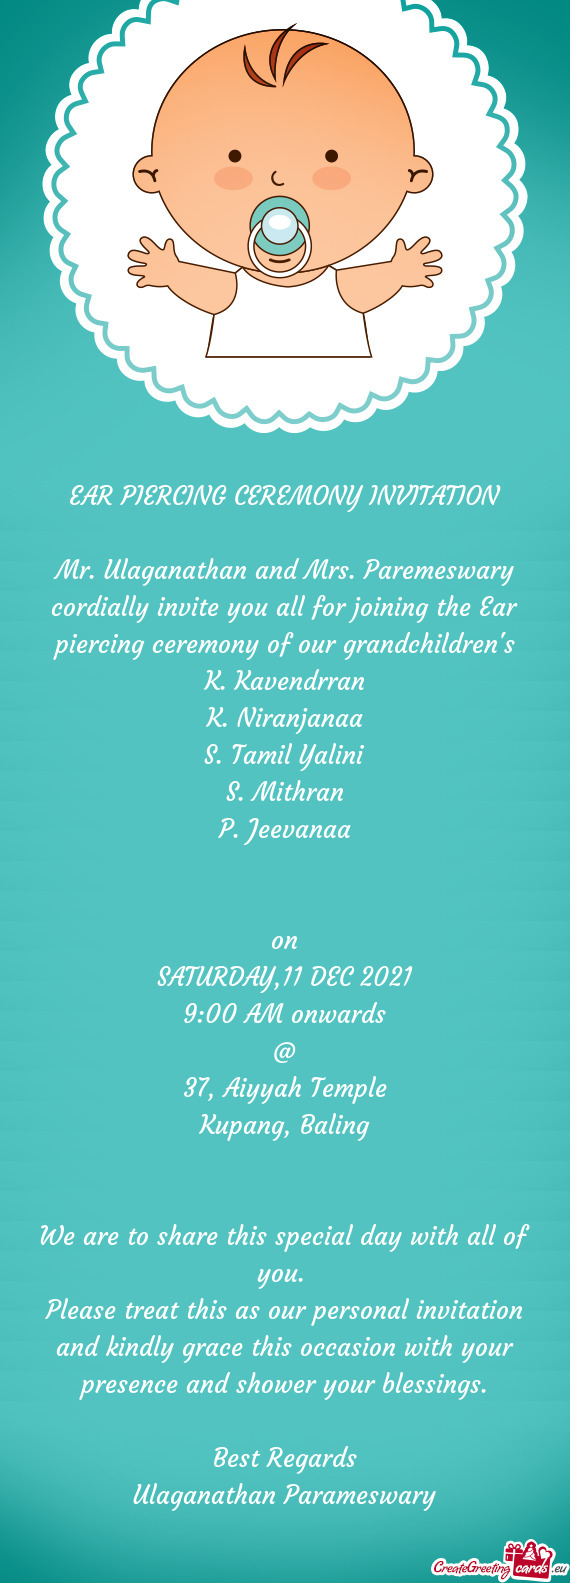 Mr. Ulaganathan and Mrs. Paremeswary cordially invite you all for joining the Ear piercing ceremony